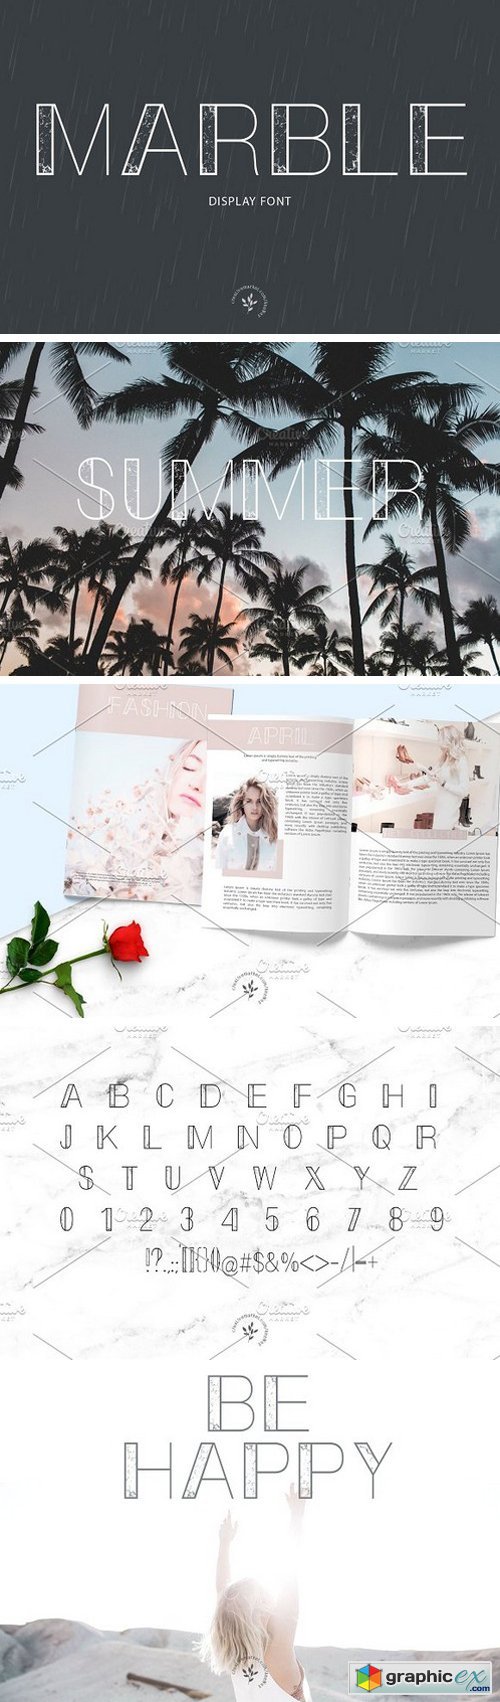 Marble Display Font